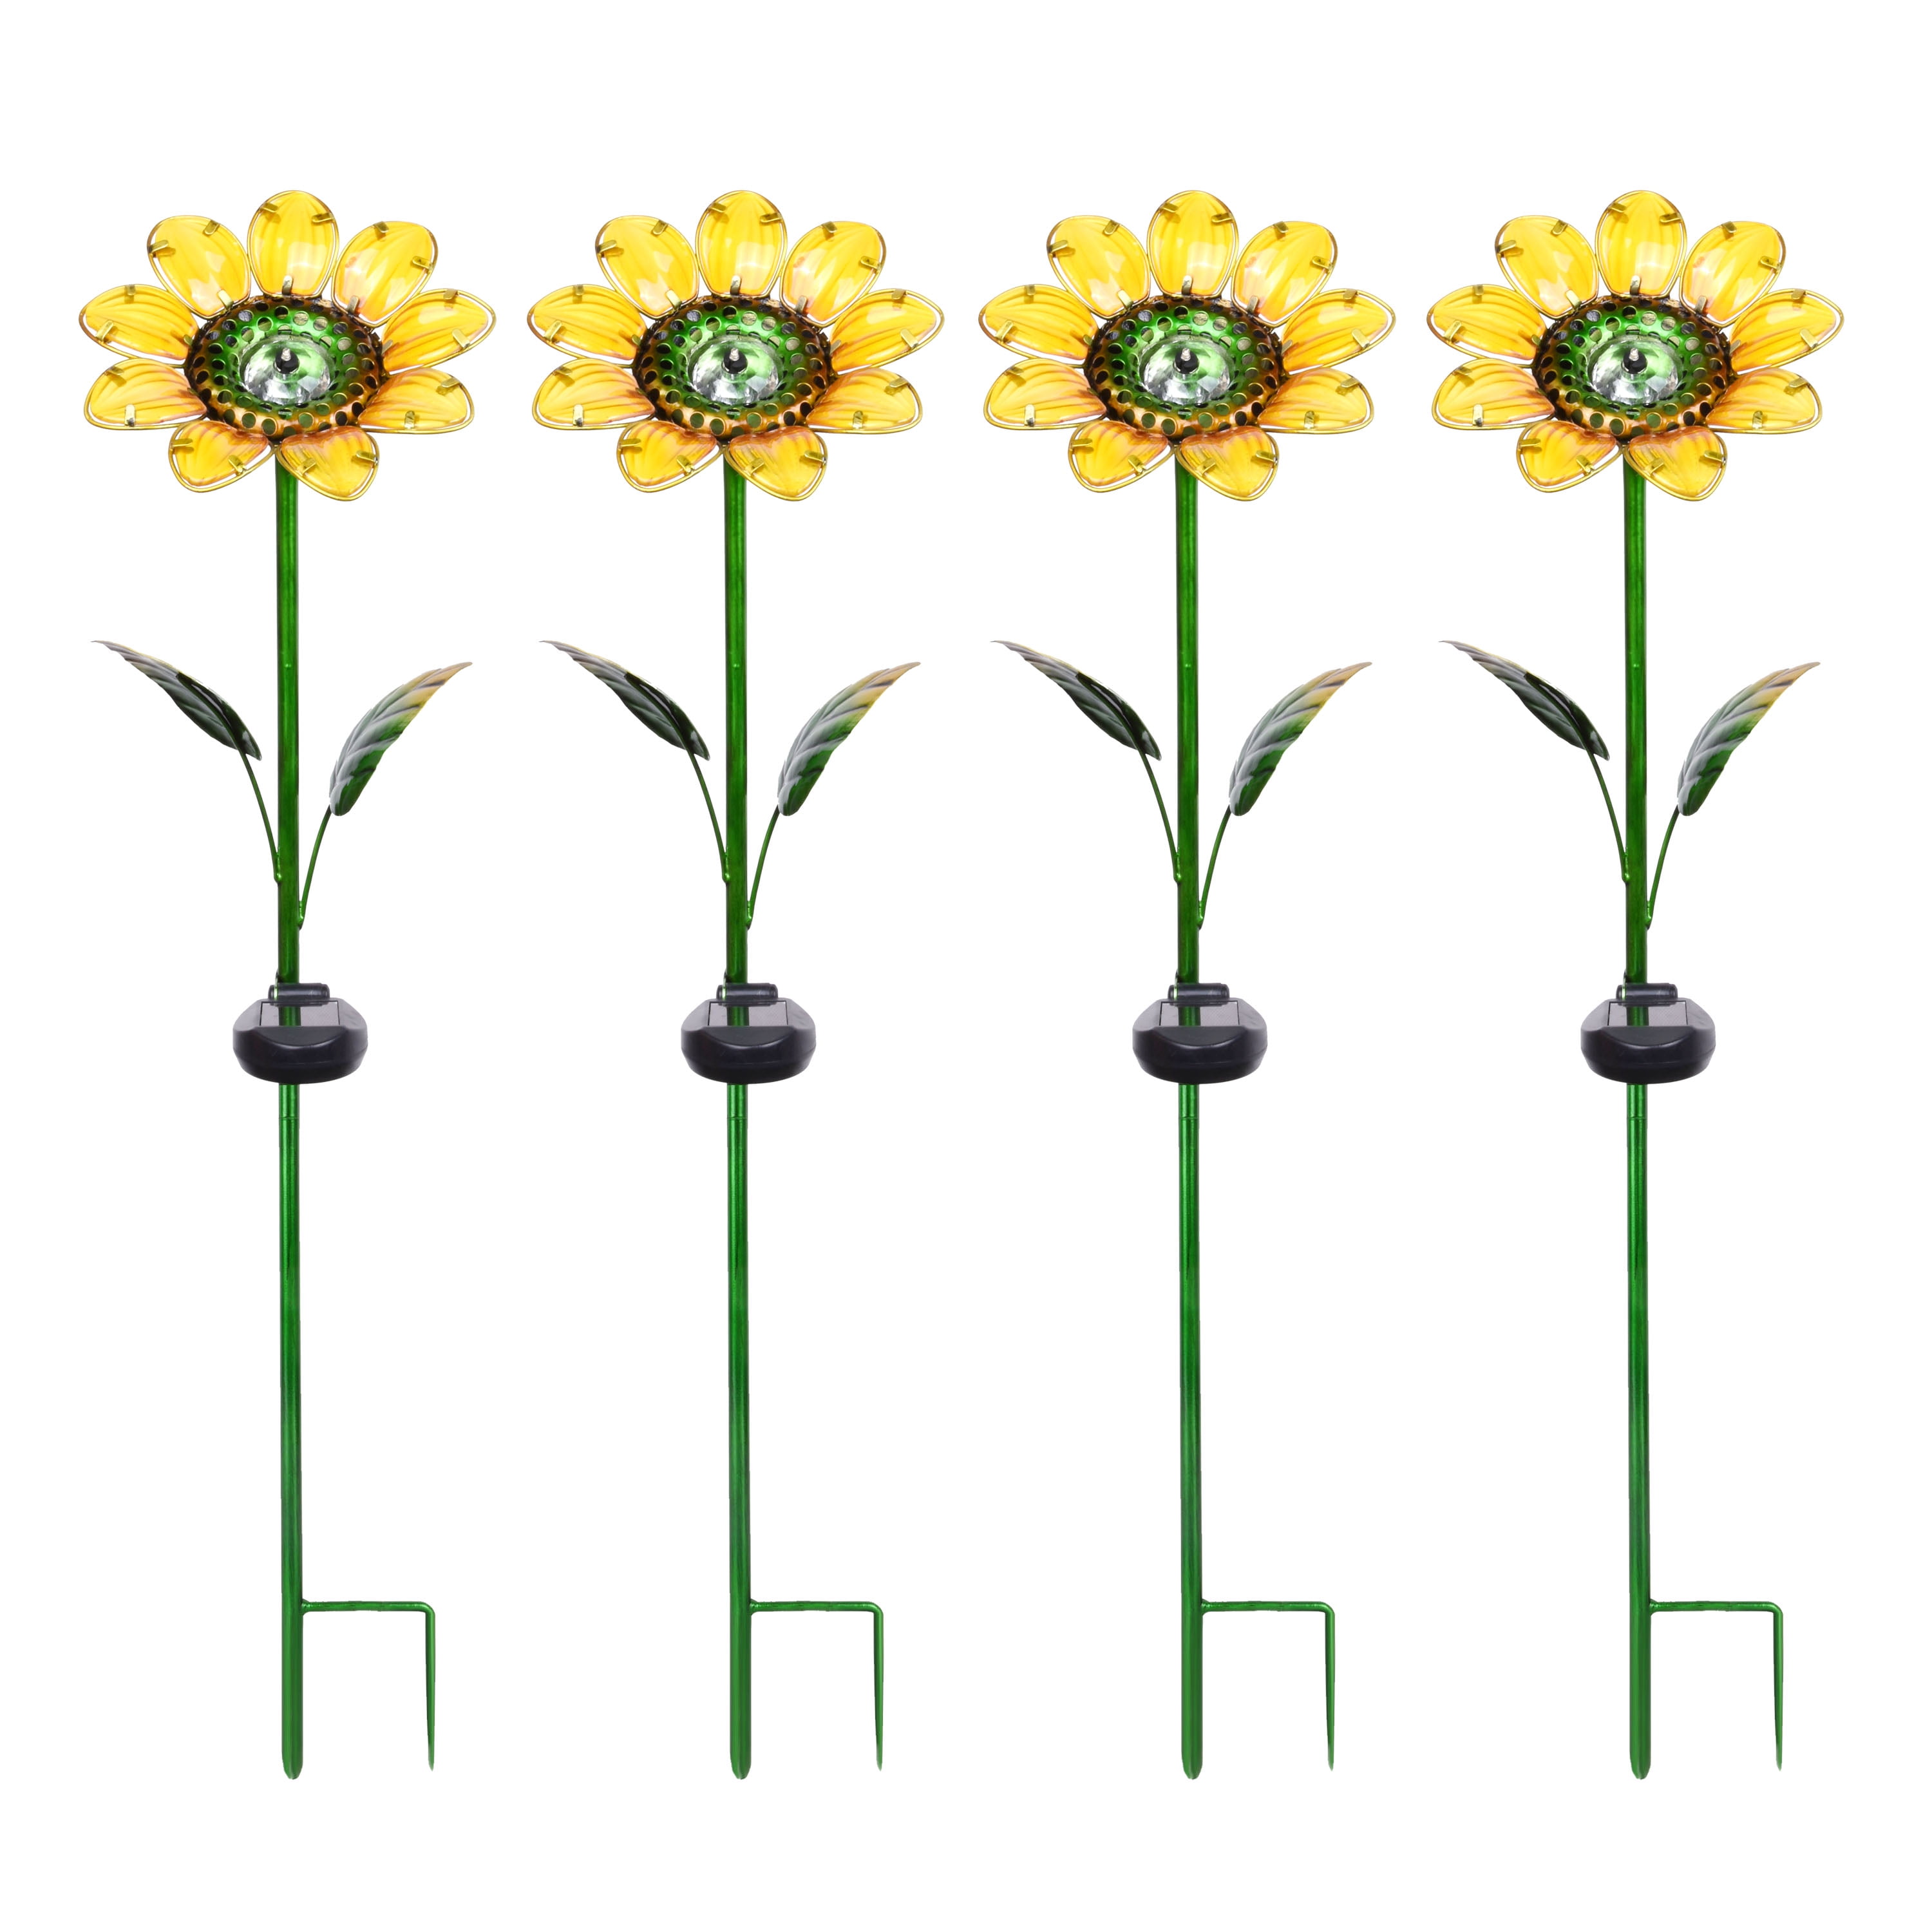 Homeleo 2 Pack Solar Sunflower Lights,Outdoor Garden Solar Powered Decorative Artificial Flowers Stake for Patio Porch Christmas Thanksgiving Gardening Flower Bed Pathway Memorial Cemetery Grave Decor 